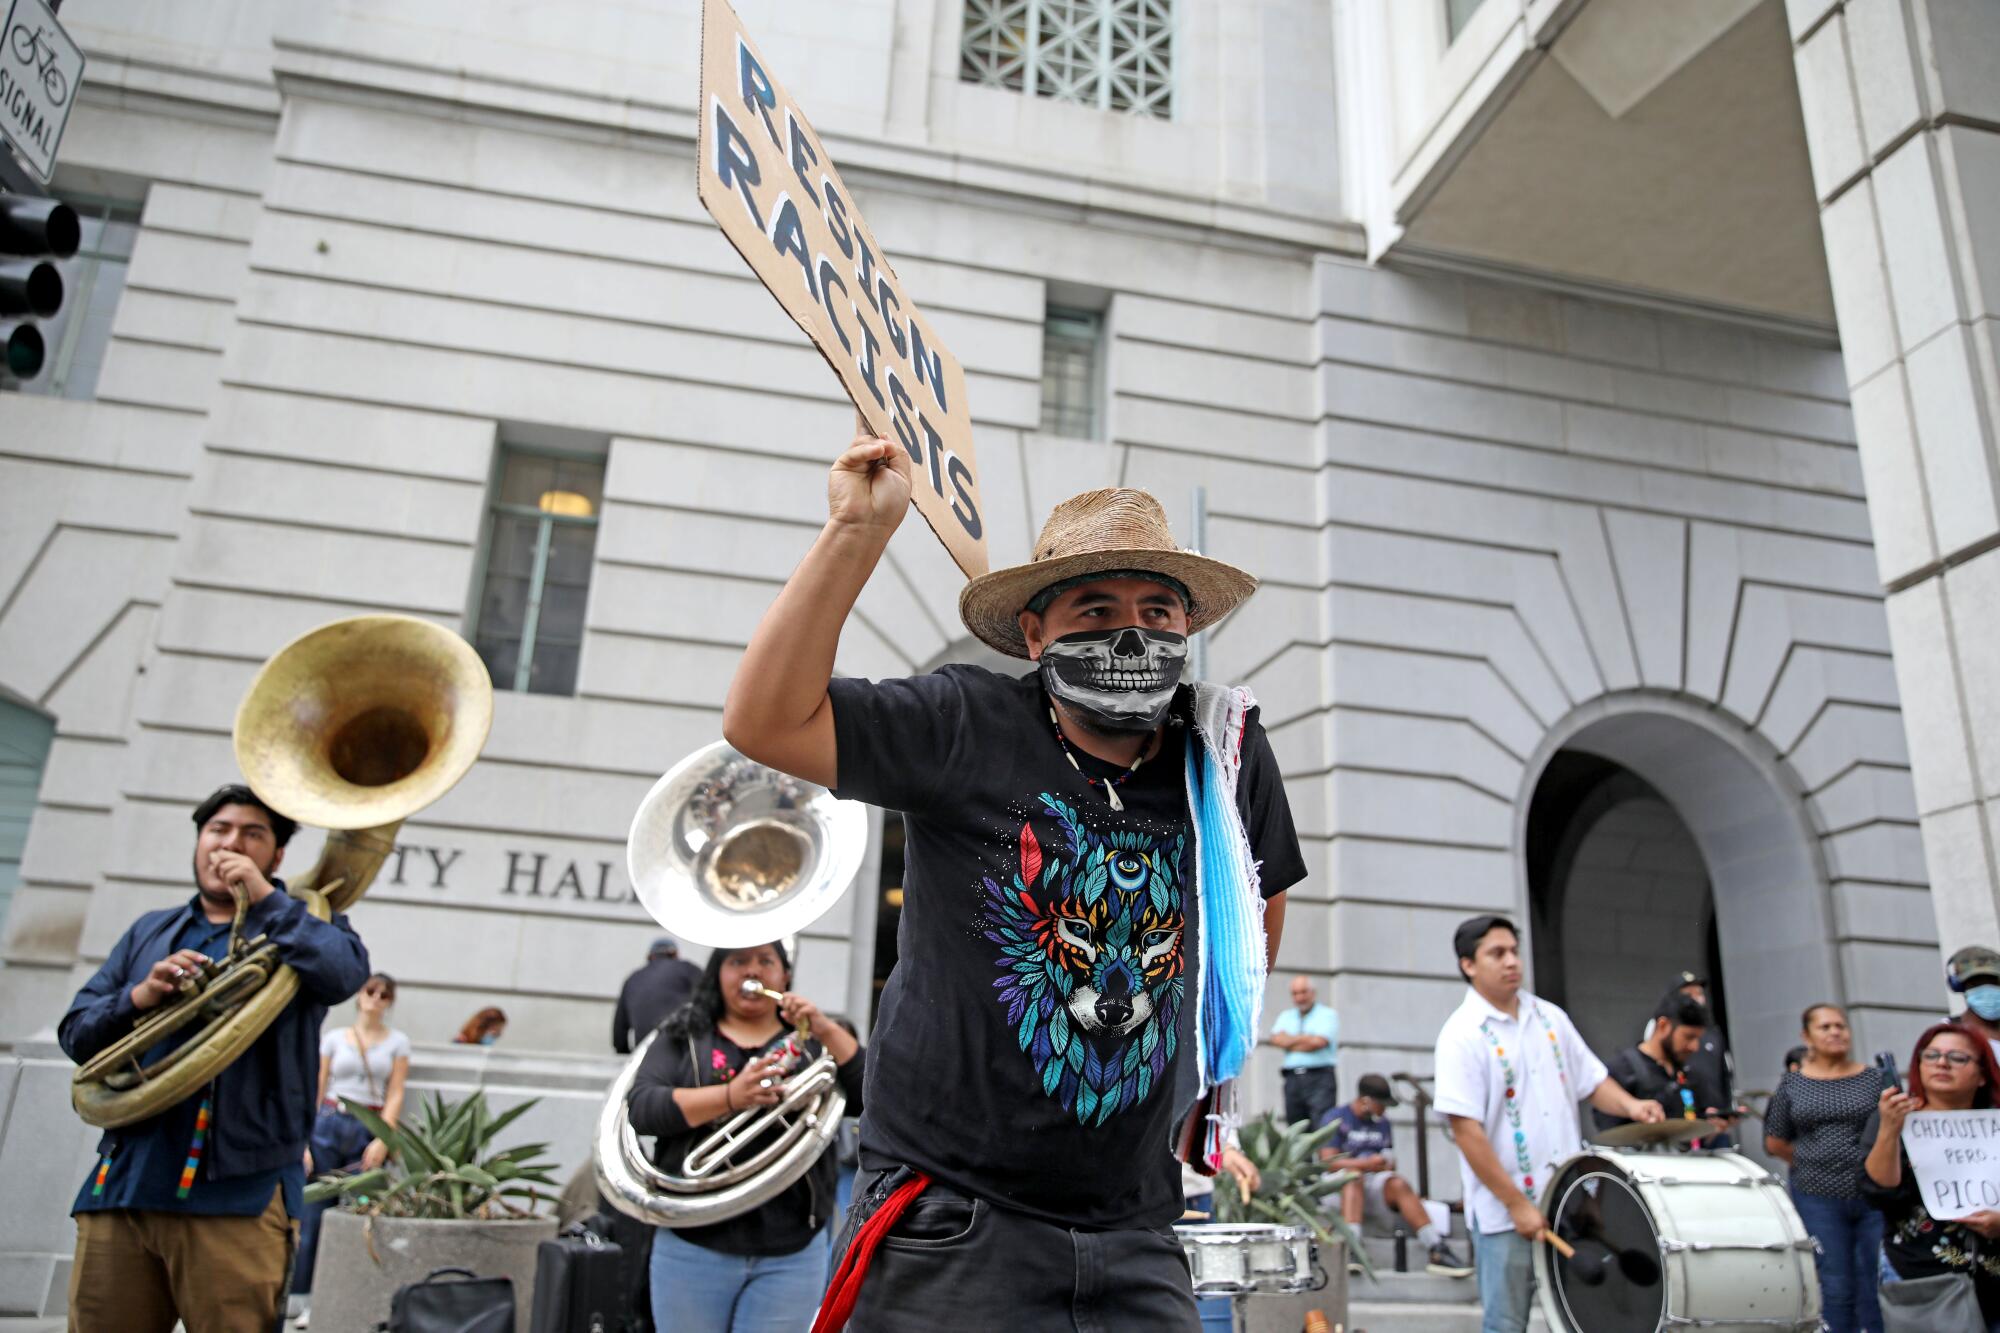 A traditional Oaxaquena band plays while protestors block Main Street during the Los Angeles City Council meeting.